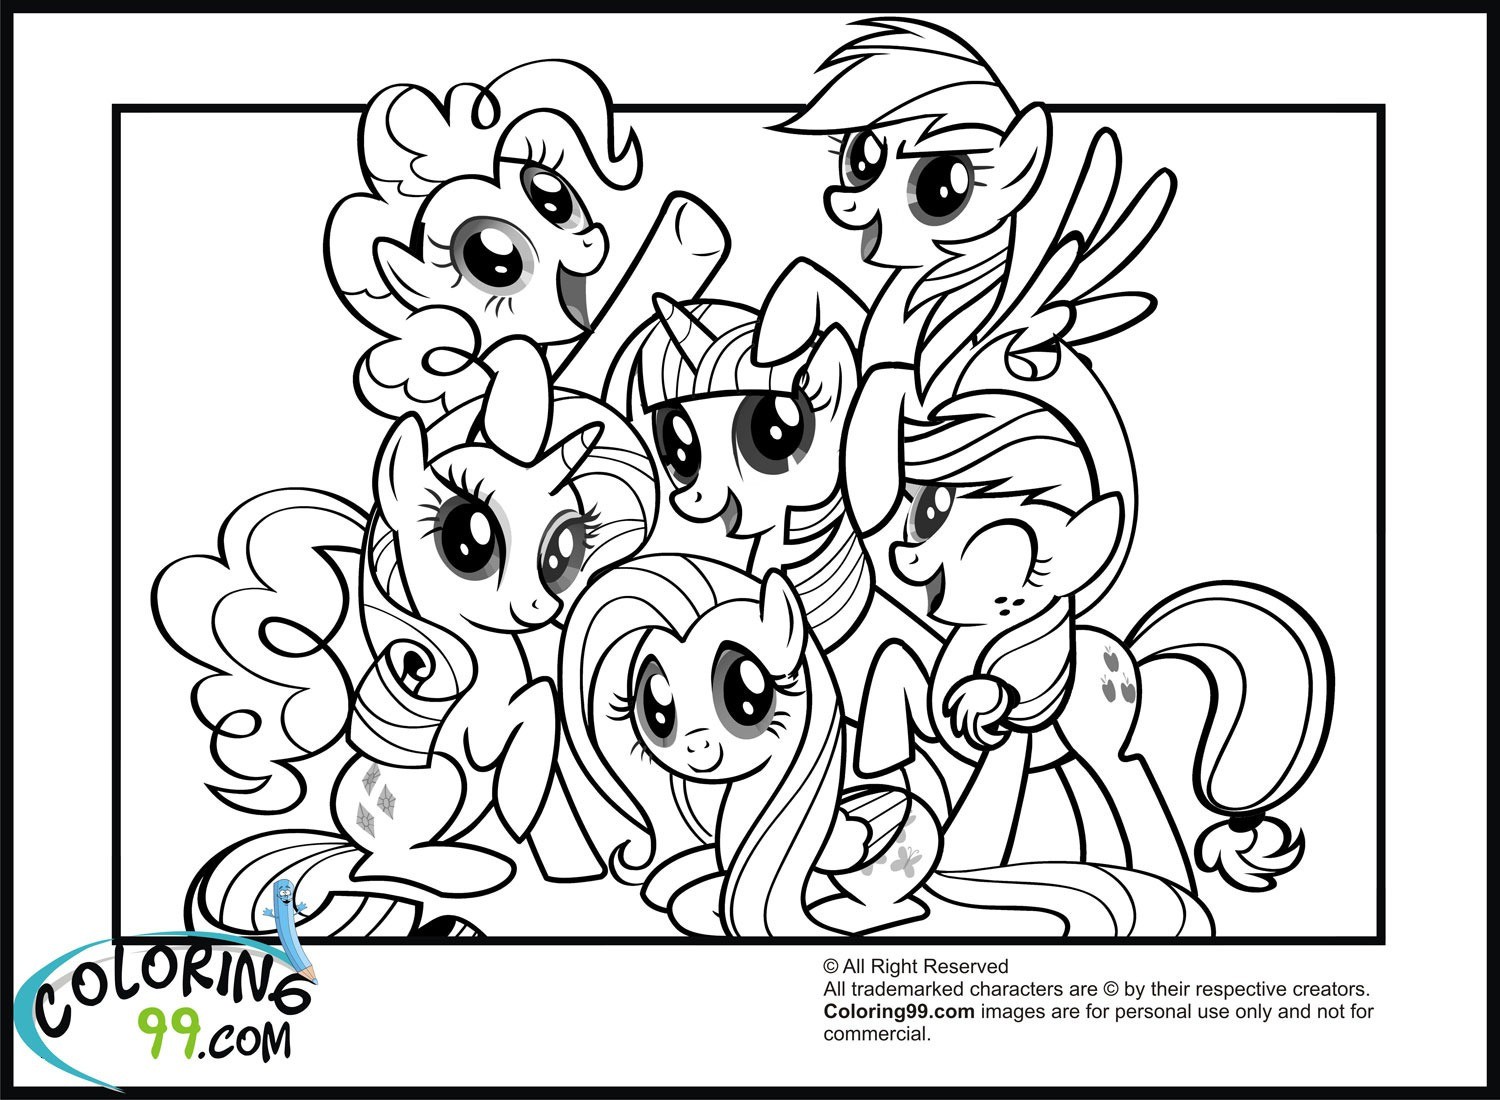 My Little Pony Friendship is Magic Coloring Pages Unique My Little Pony Friendship is Magic Coloring